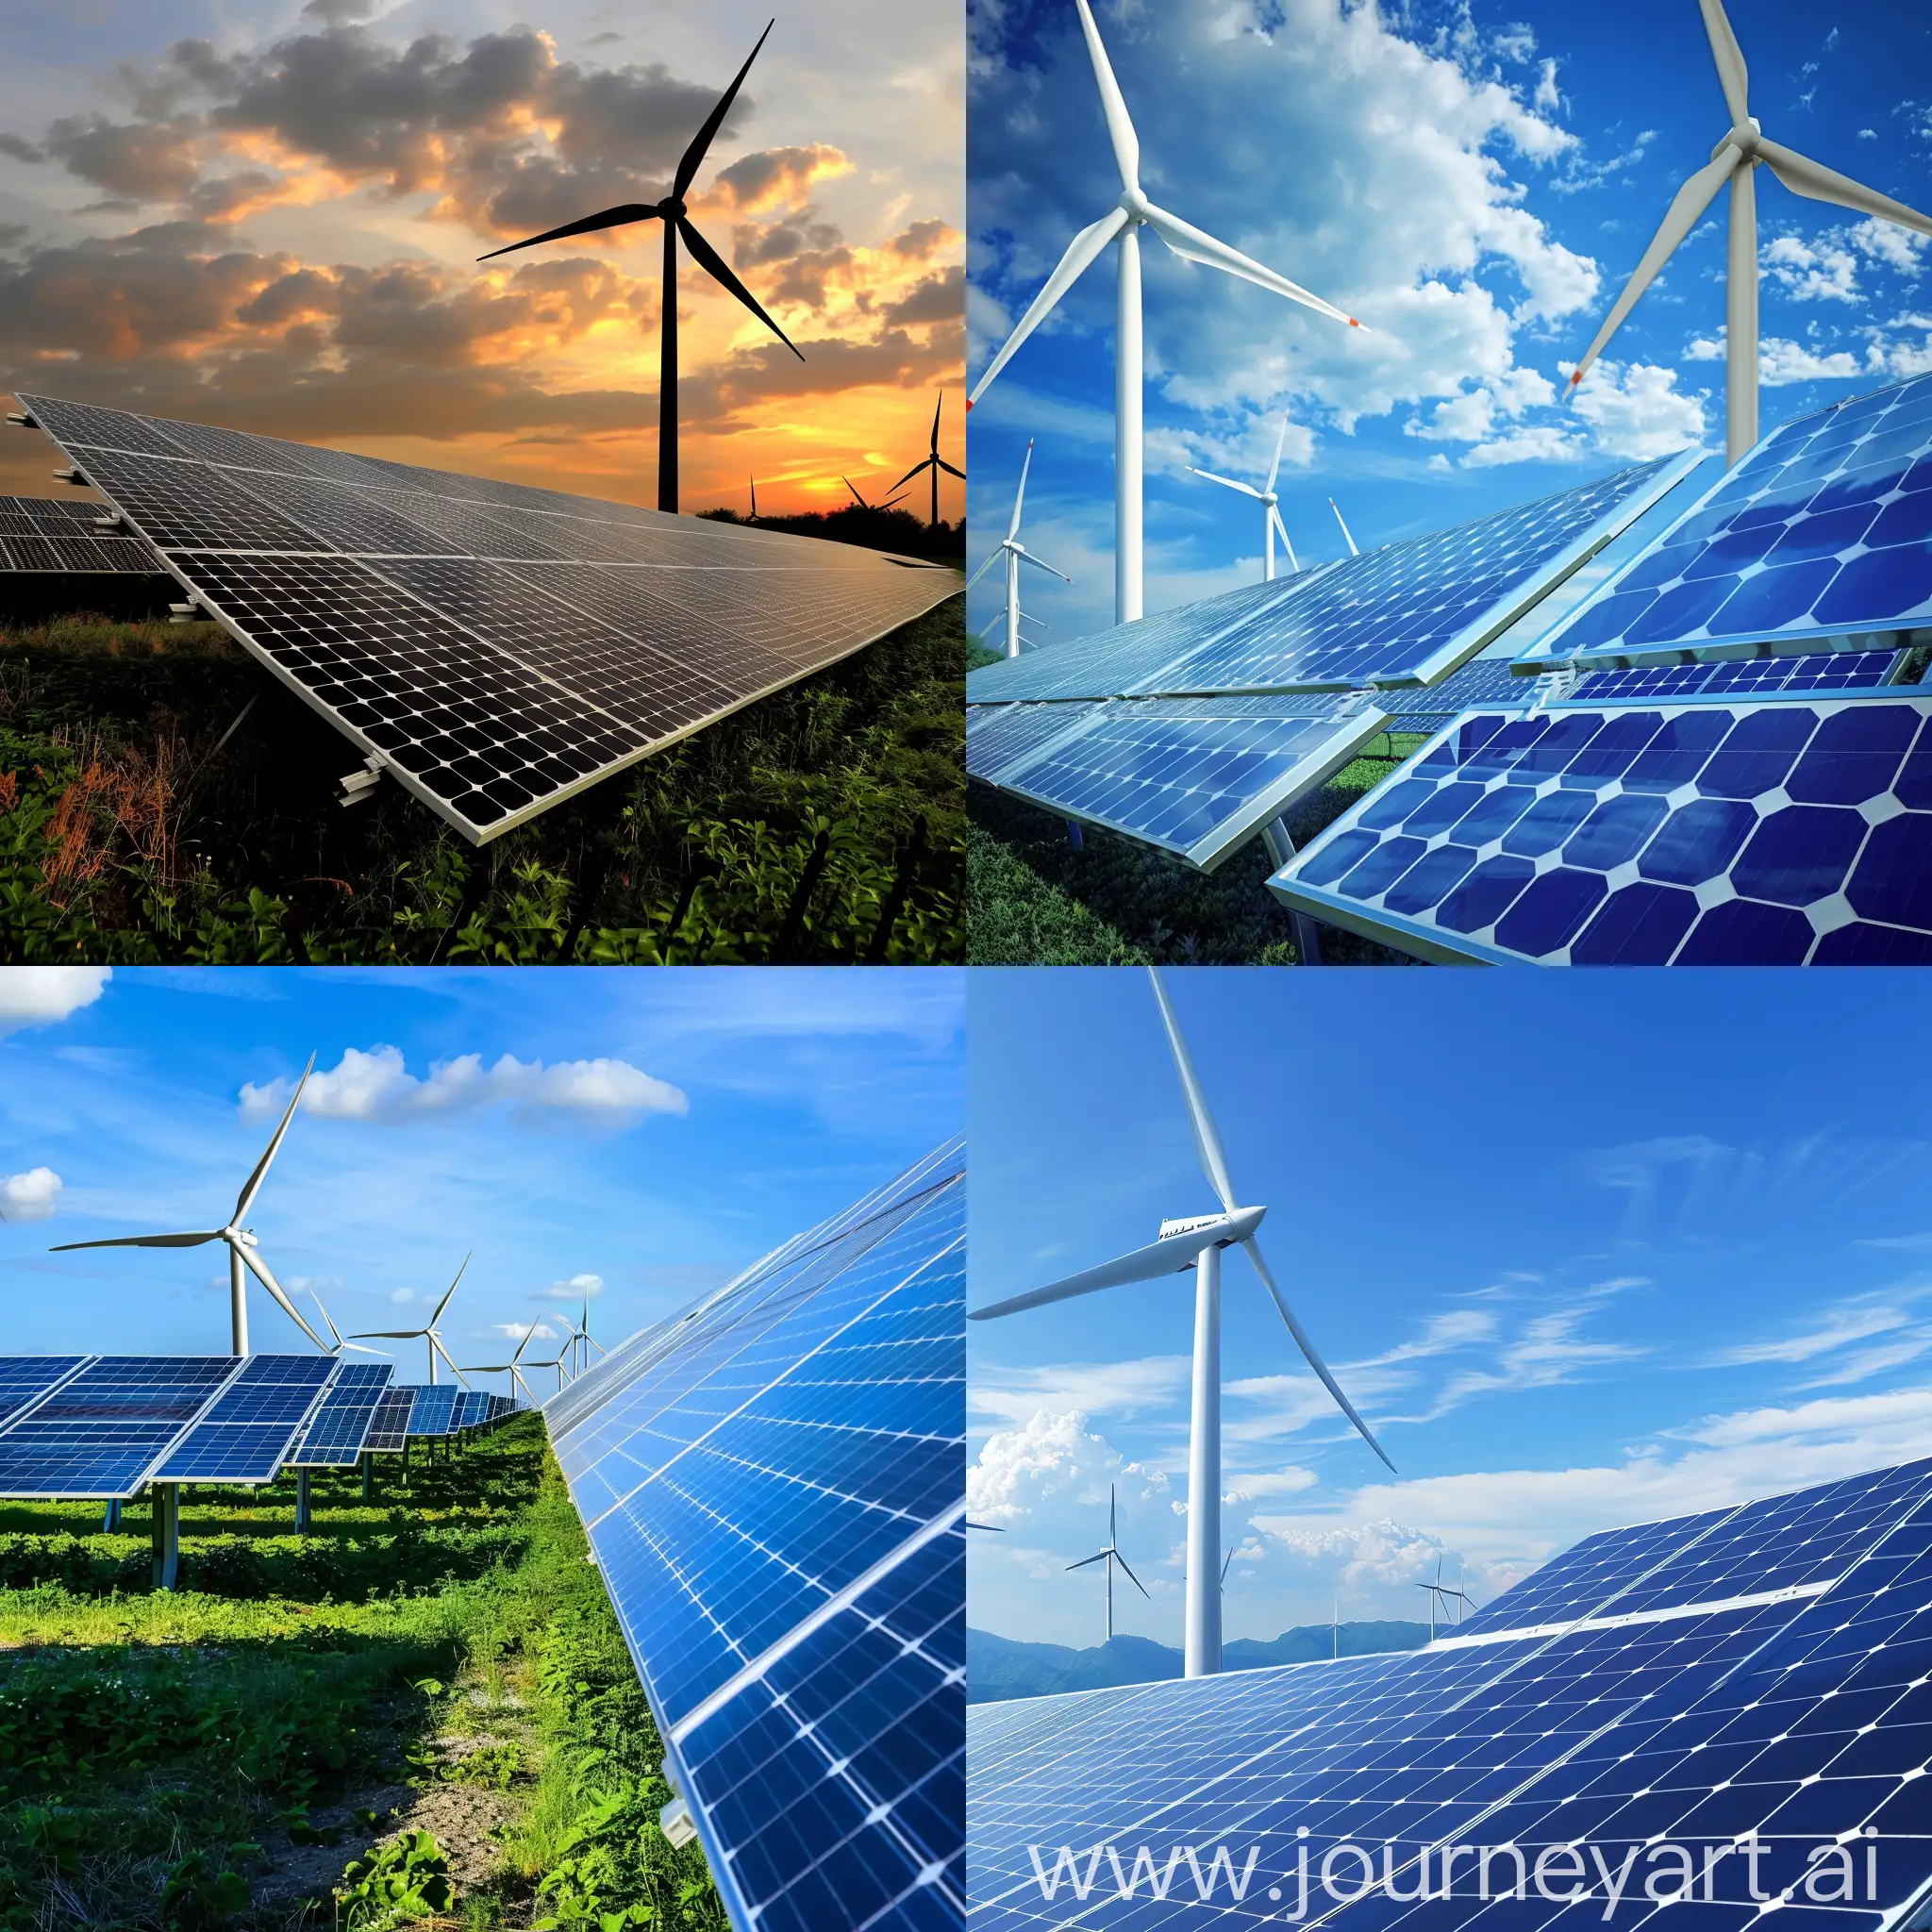 Futuristic-Landscape-with-Solar-and-Wind-Energy-Revolution